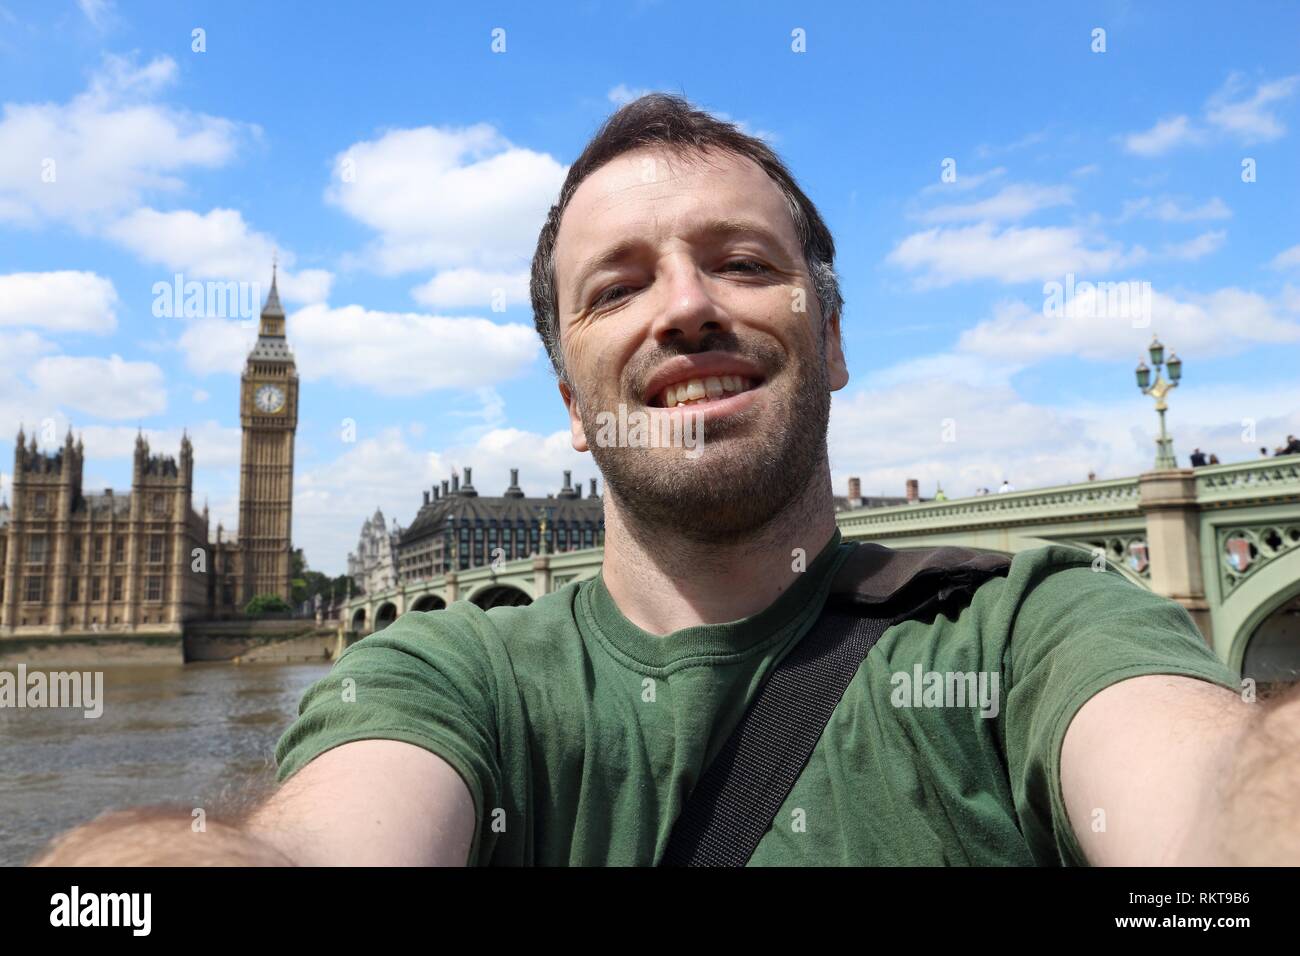 Tourist selfie with London parliament and Big Ben. Stock Photo